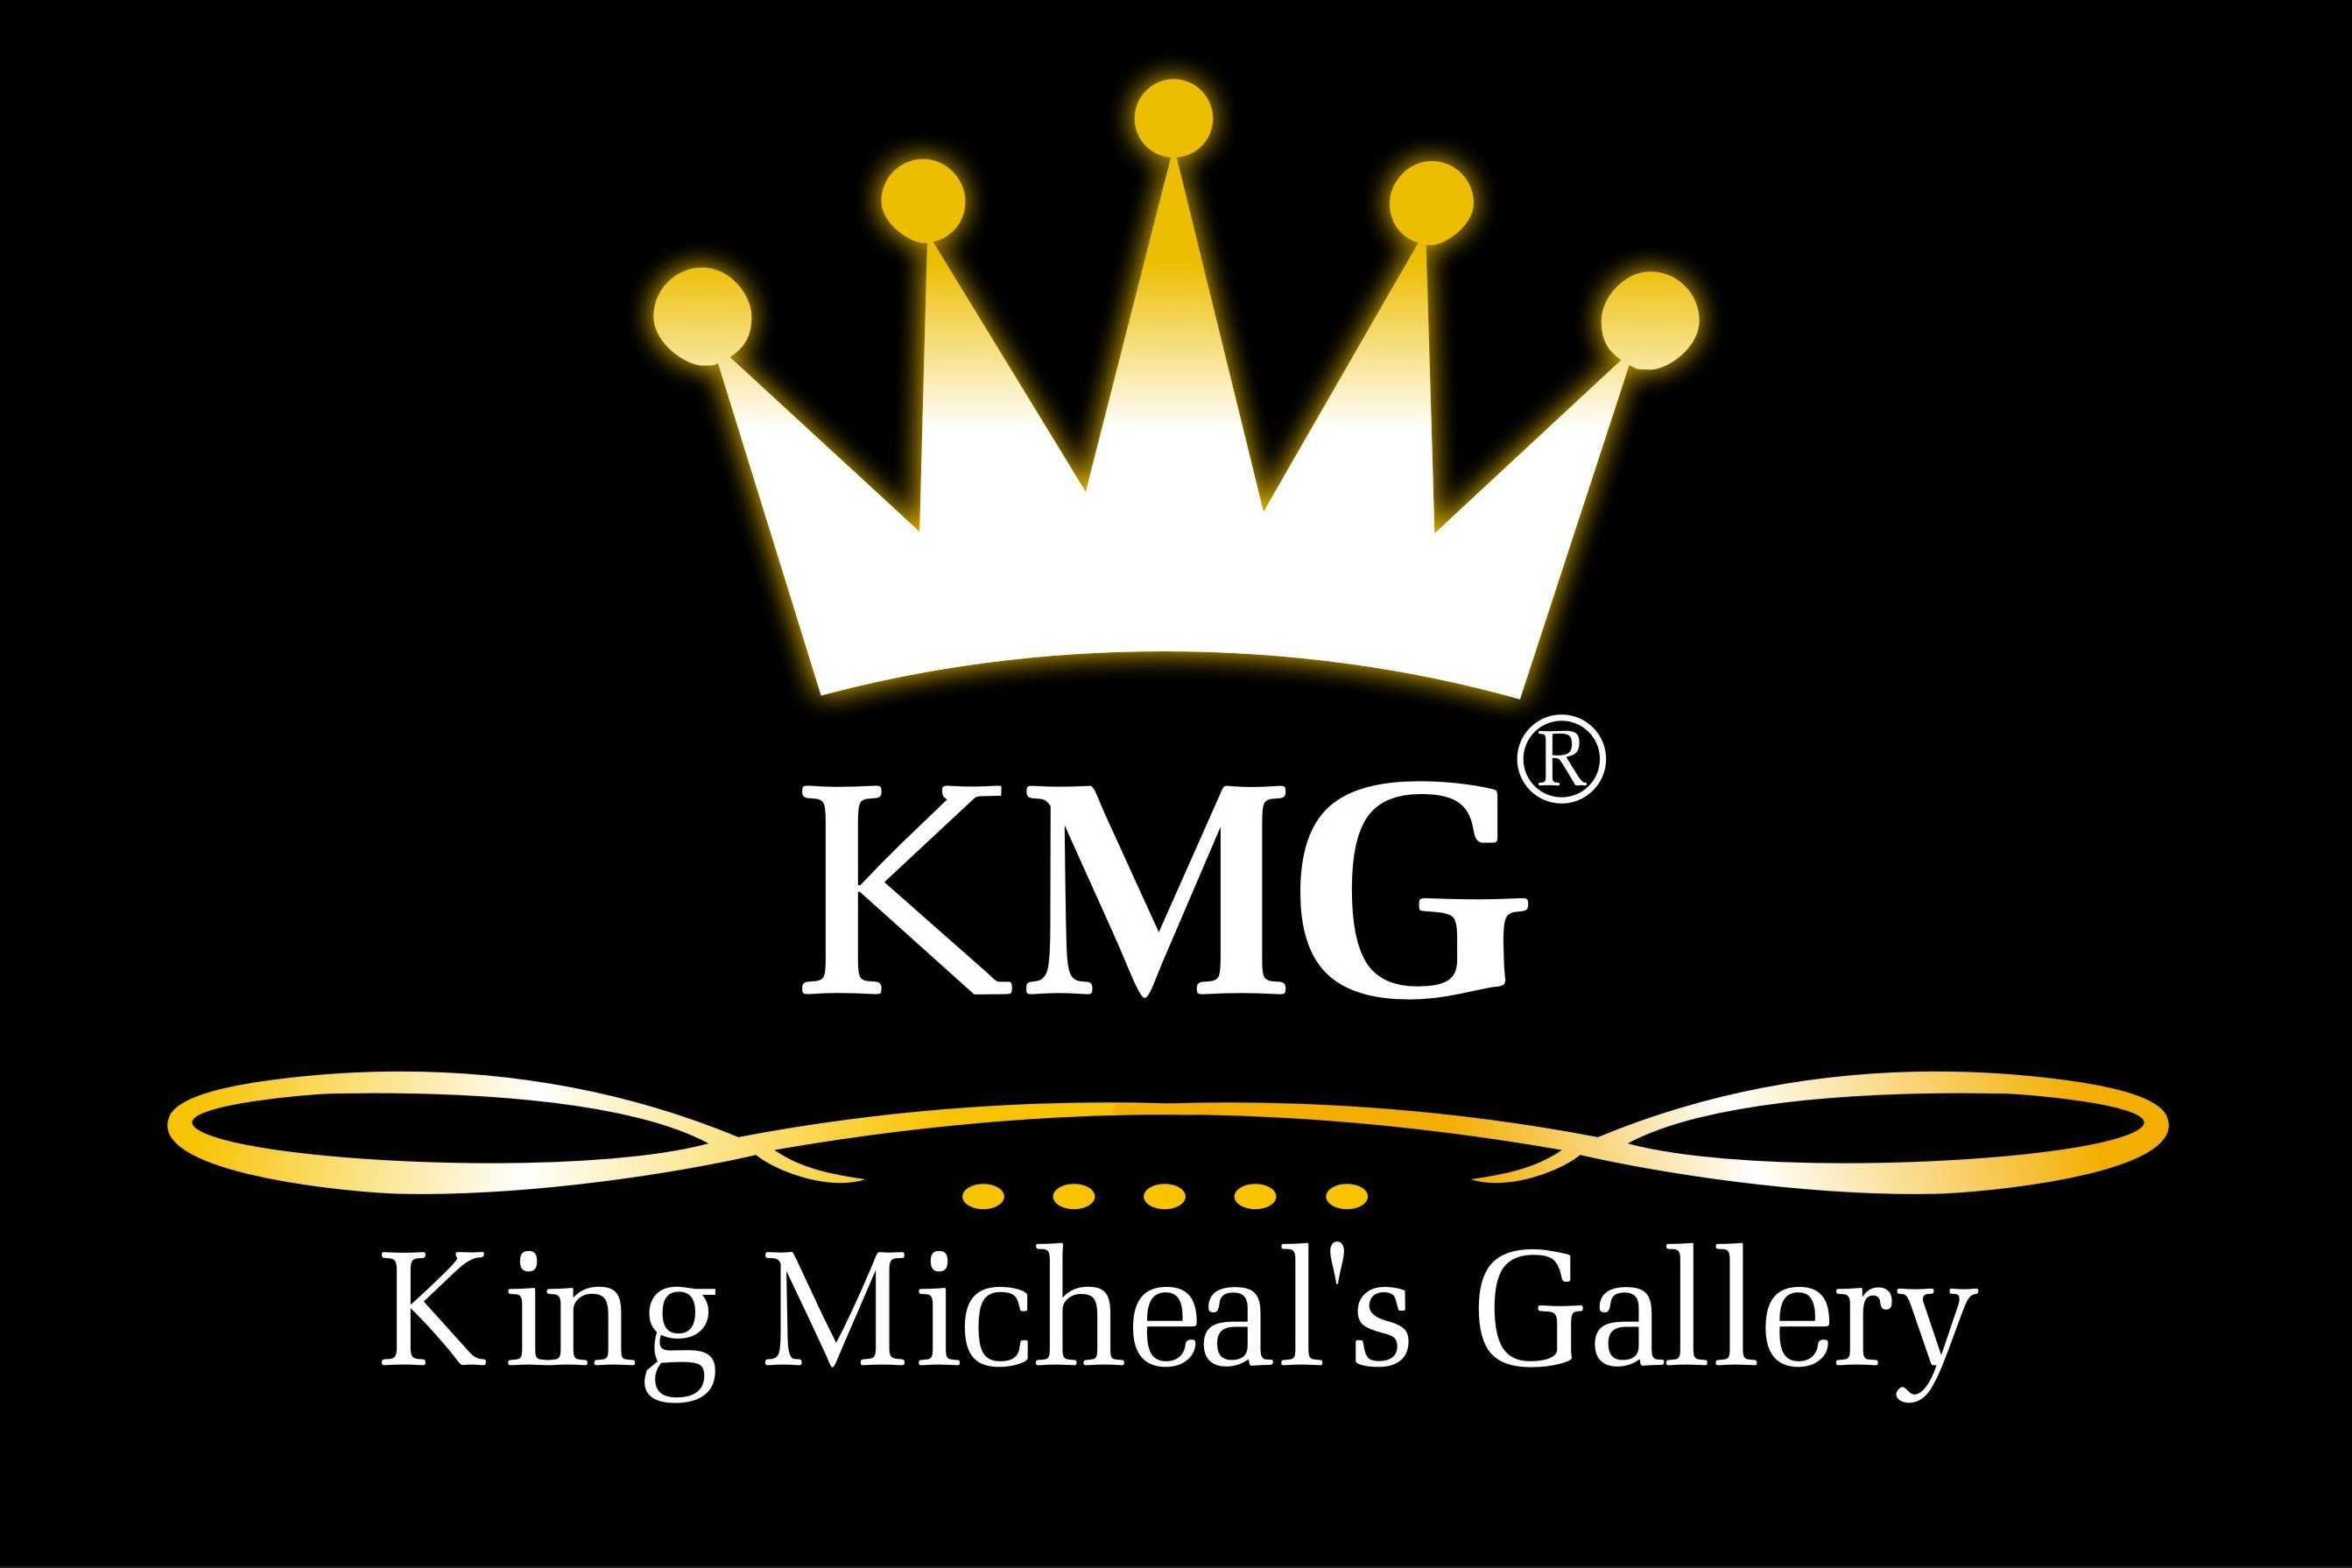  KMG KING MICHEAL'S GALLERY